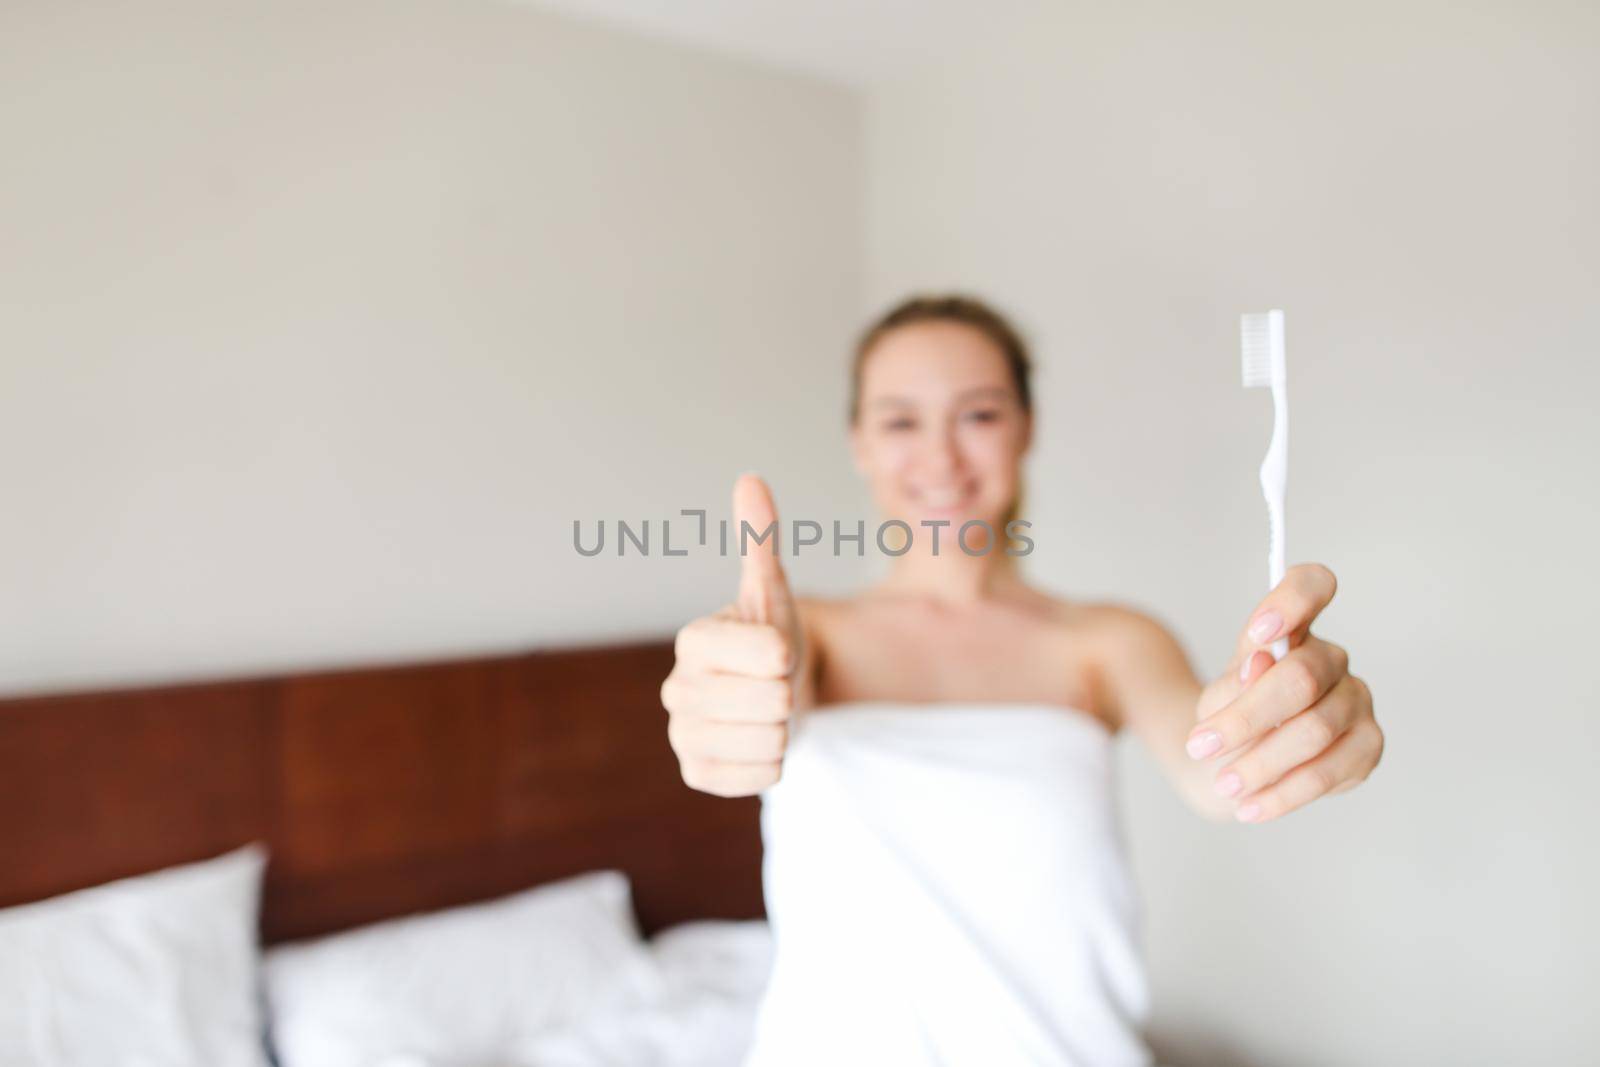 Young smiling female person wrapped in white towel standing with toothbrush near bed, showing thumbs up. Concept of morning hygiene and healthy way of life.